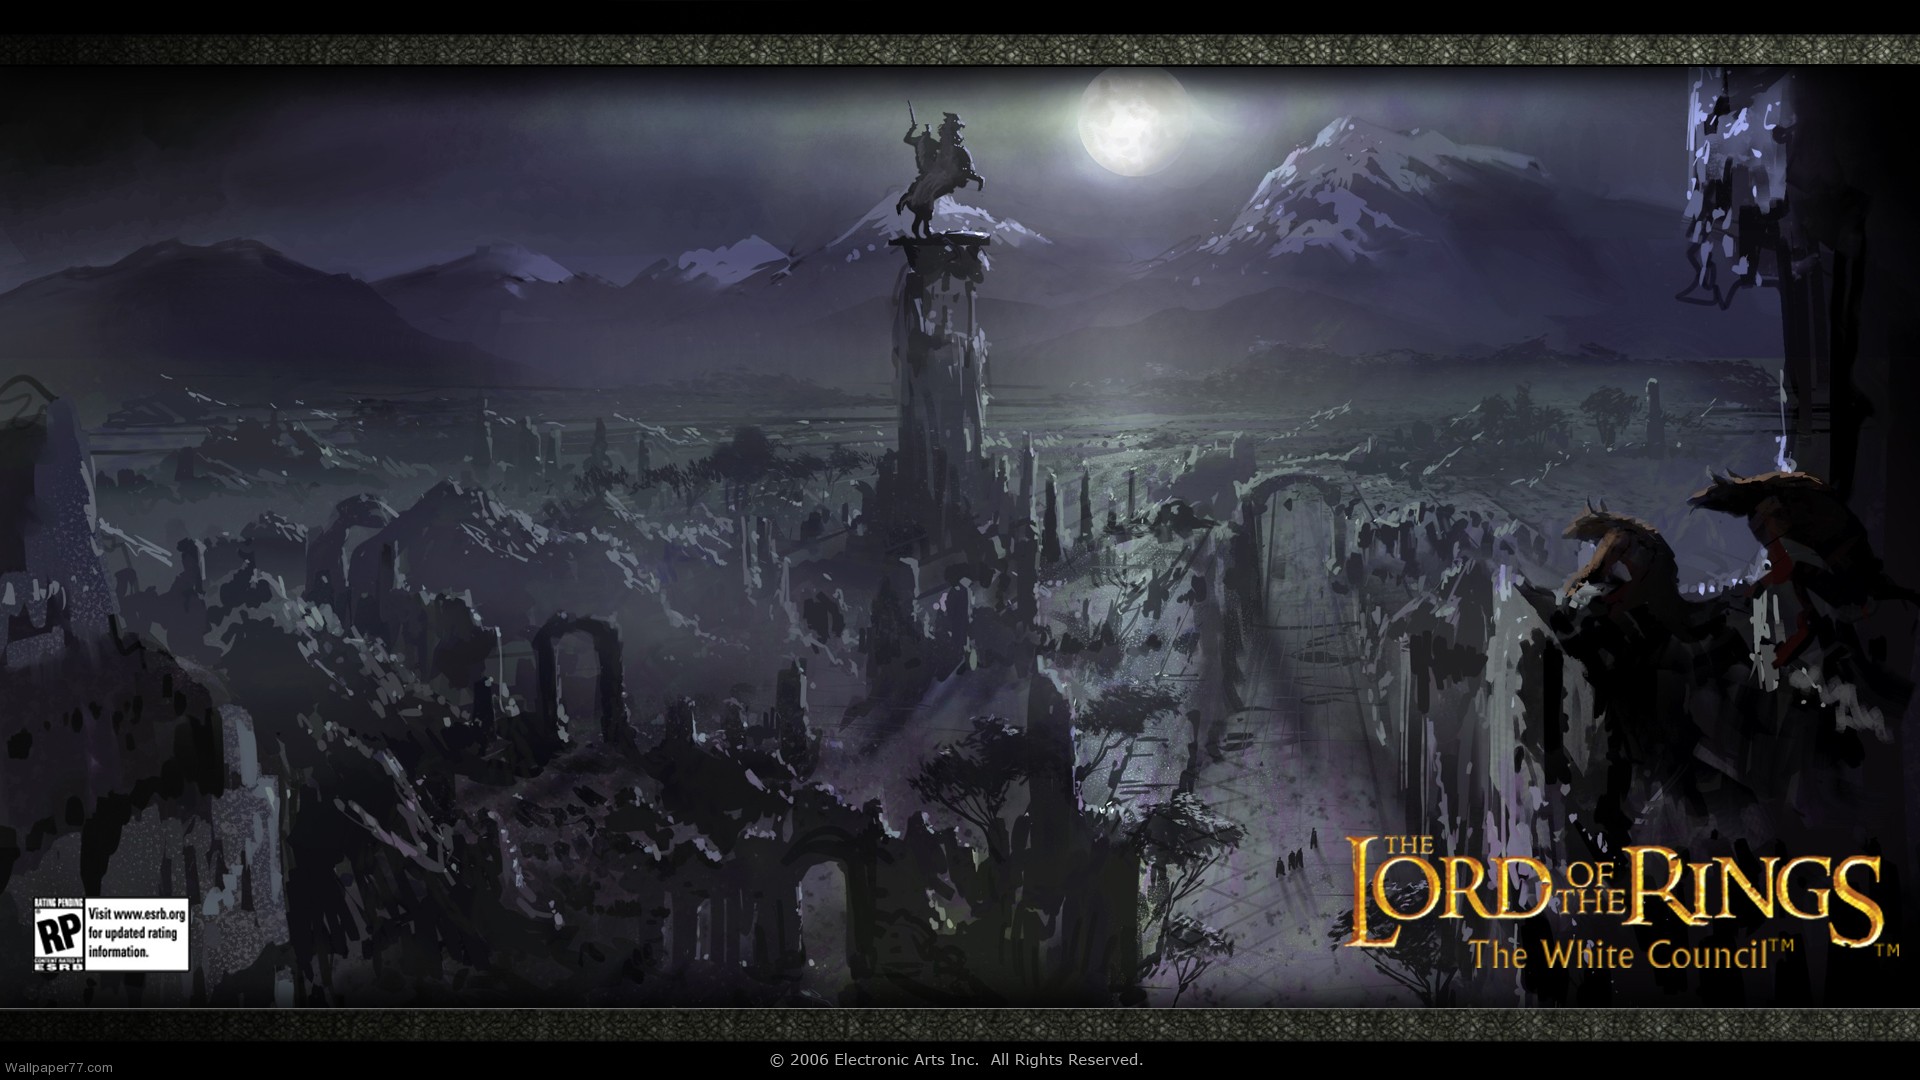 Lord of the Rings Wallpaper 4 lord of the rings wallpaperslord of the 1920x1080